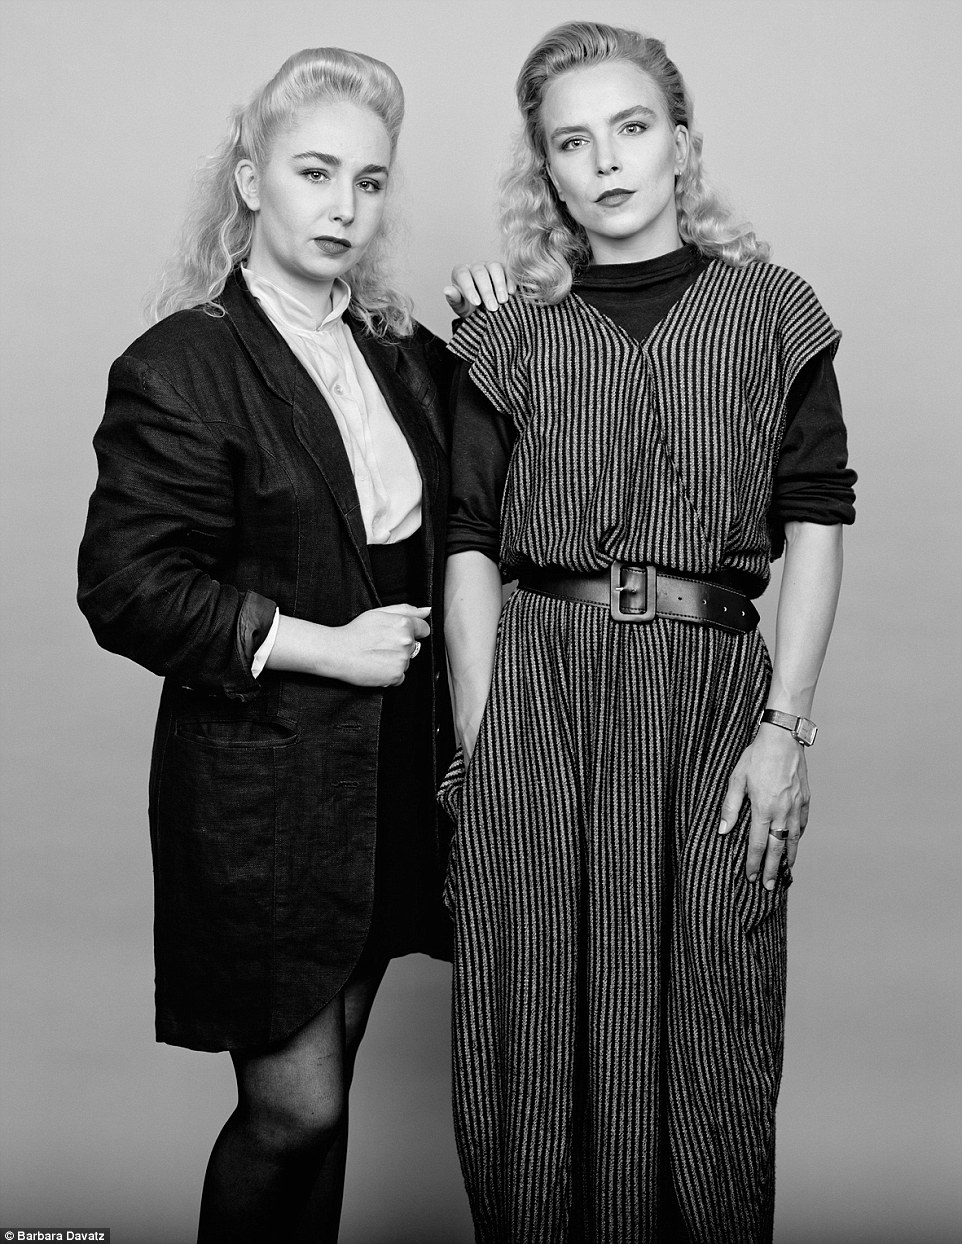 In 1988, Lili and Franciska both wear baggy clothing, with Lili wearing a long blazer and Franciska wearing a jumpsuit with a top underneath